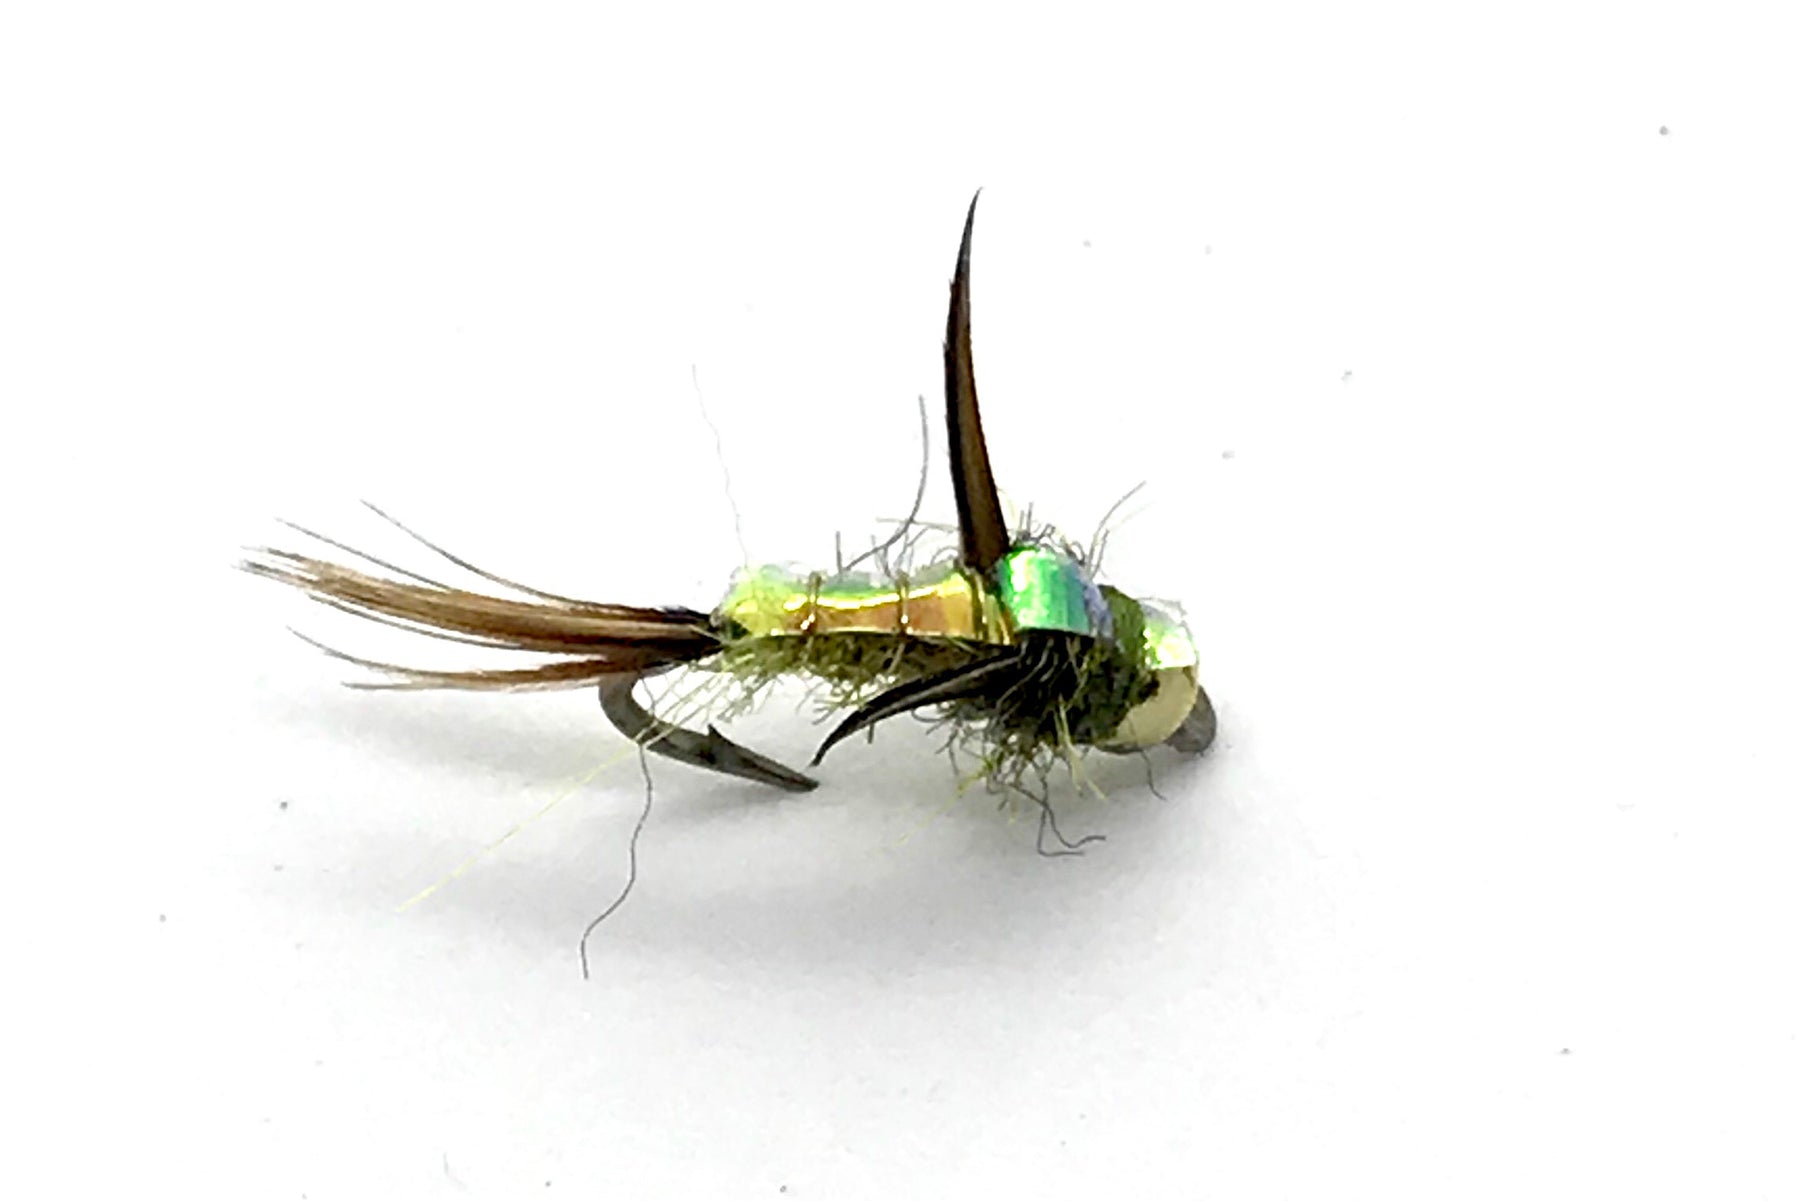 TB Jig Evil Weevil (all colors)